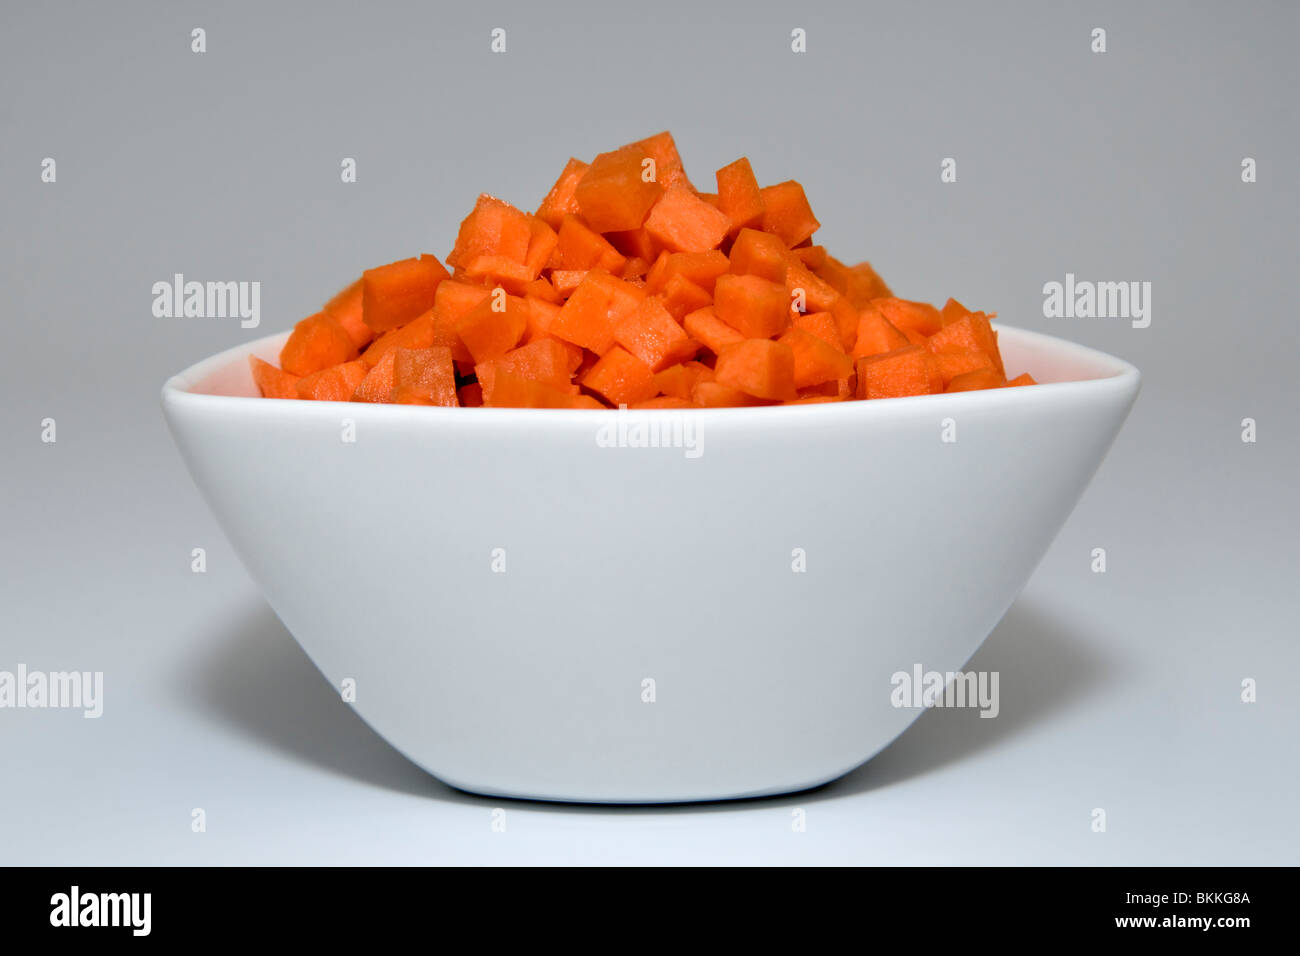 Studio shot of diced carrots in white bowl against a plain white background Stock Photo